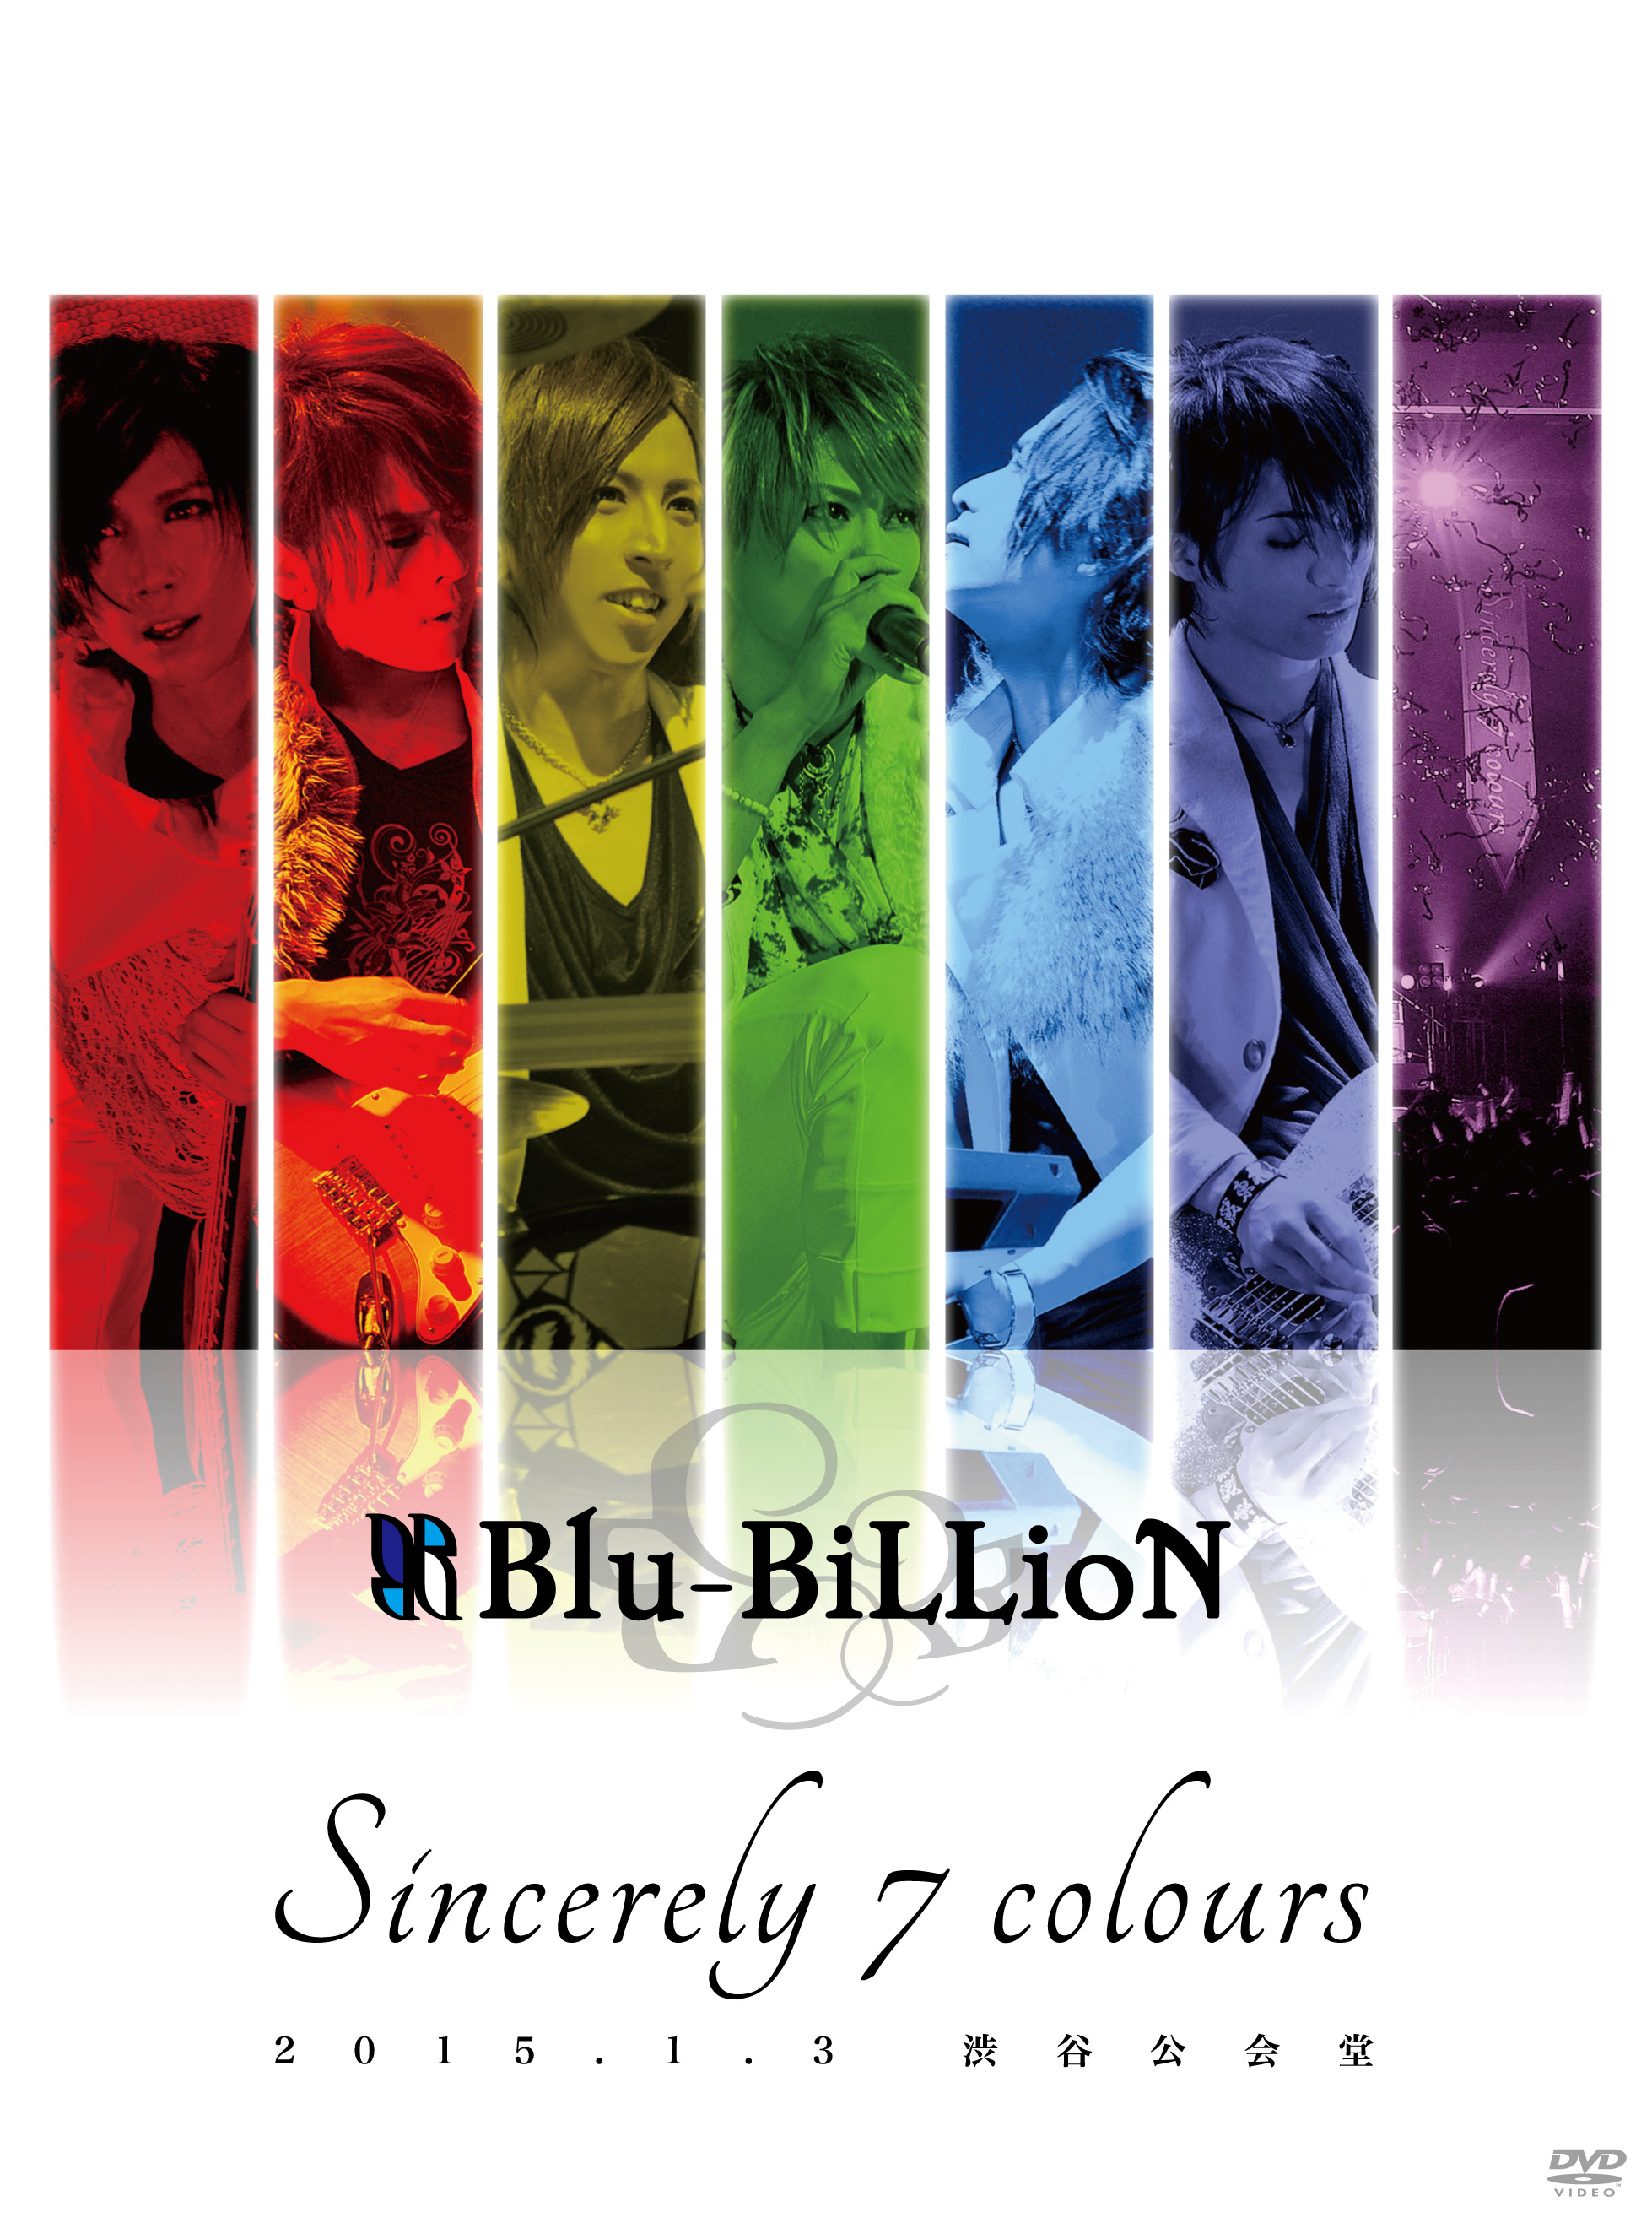 Blu-BiLLioN ( ブルービリオン )  の DVD 「Sincerely 7 colours」2015.1.3 渋谷公会堂【初回限定Special Edition】